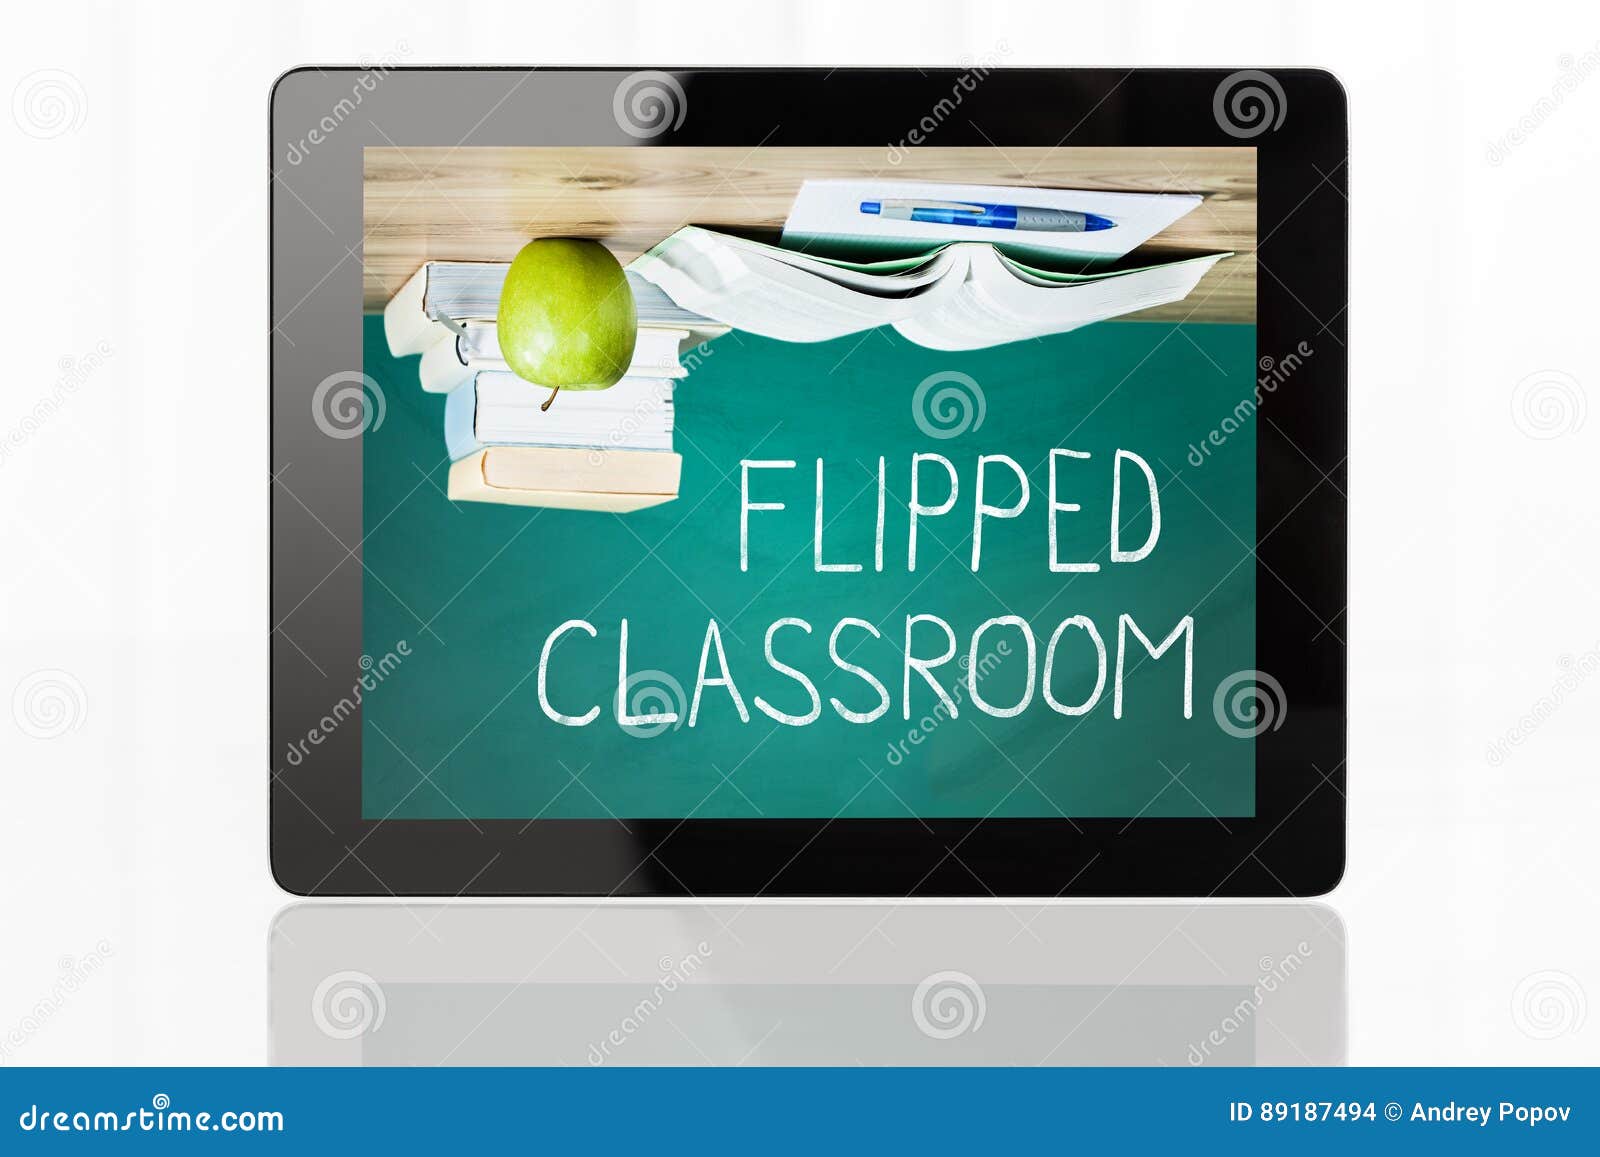 flipped classroom concept on digital tablet